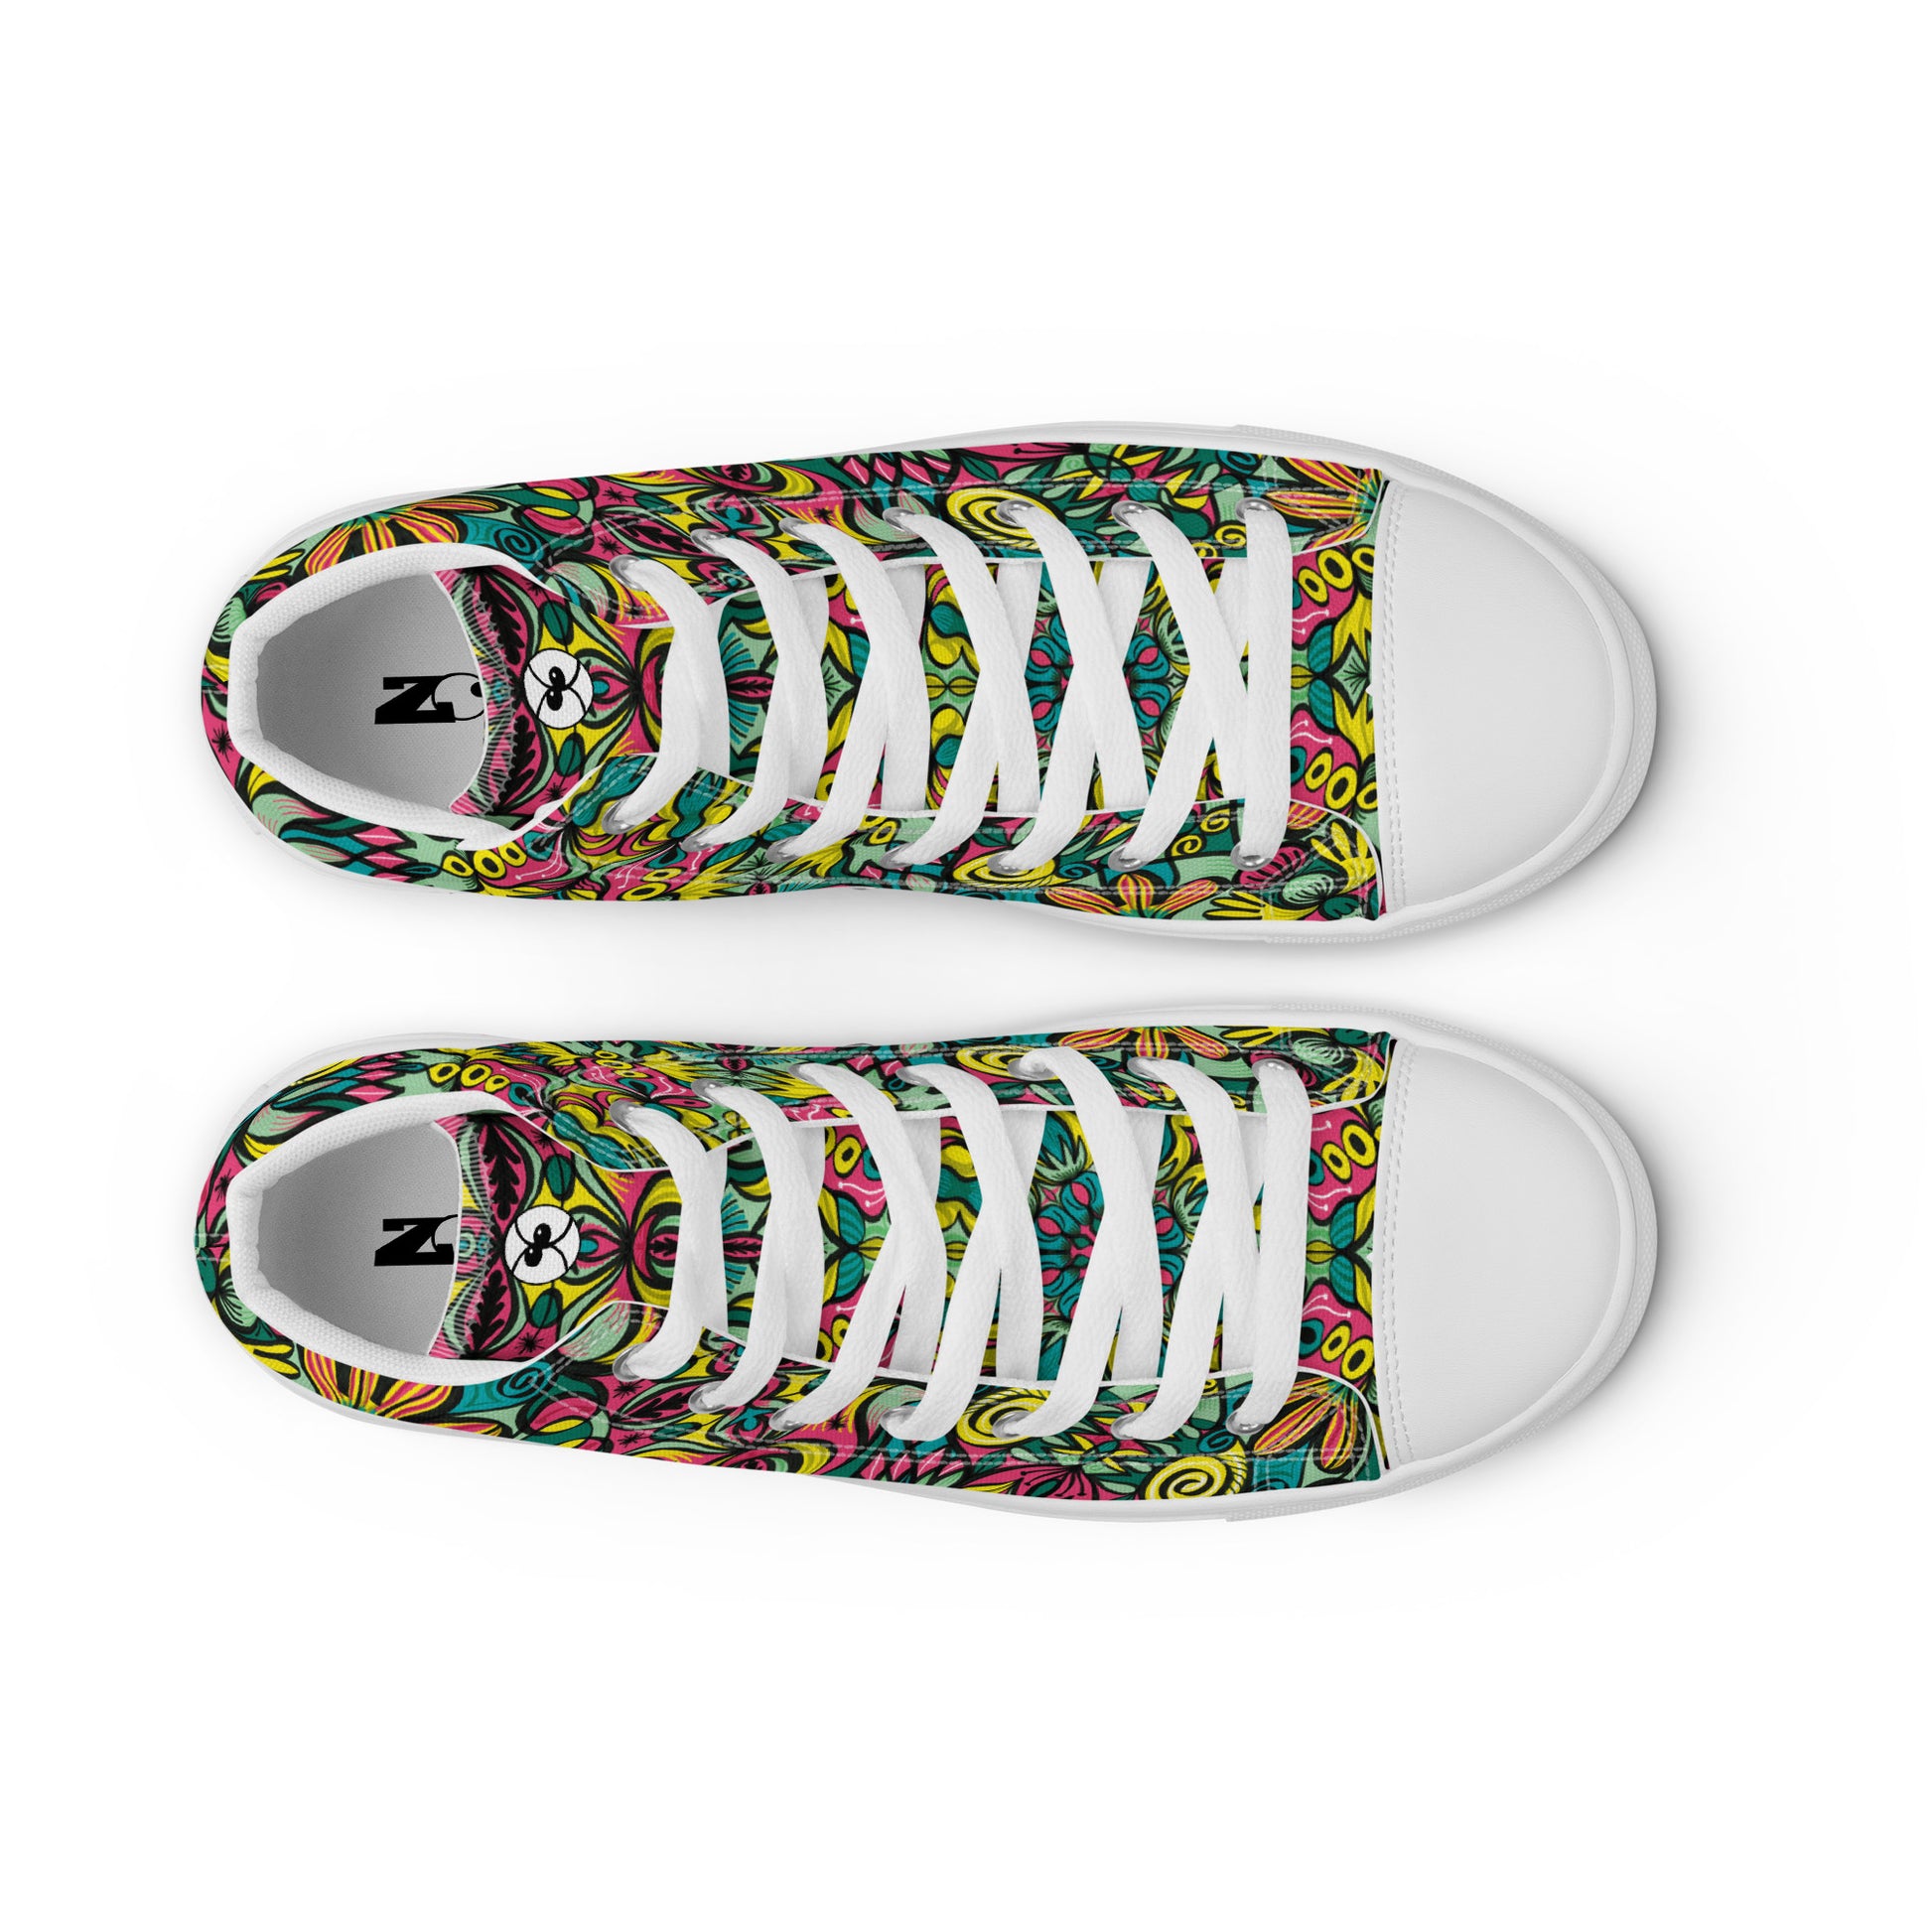 Exploring Jungle Oddities: Inspiration from the Fascinating Wildflowers of the Tropics. Women’s high top canvas shoes. Top view